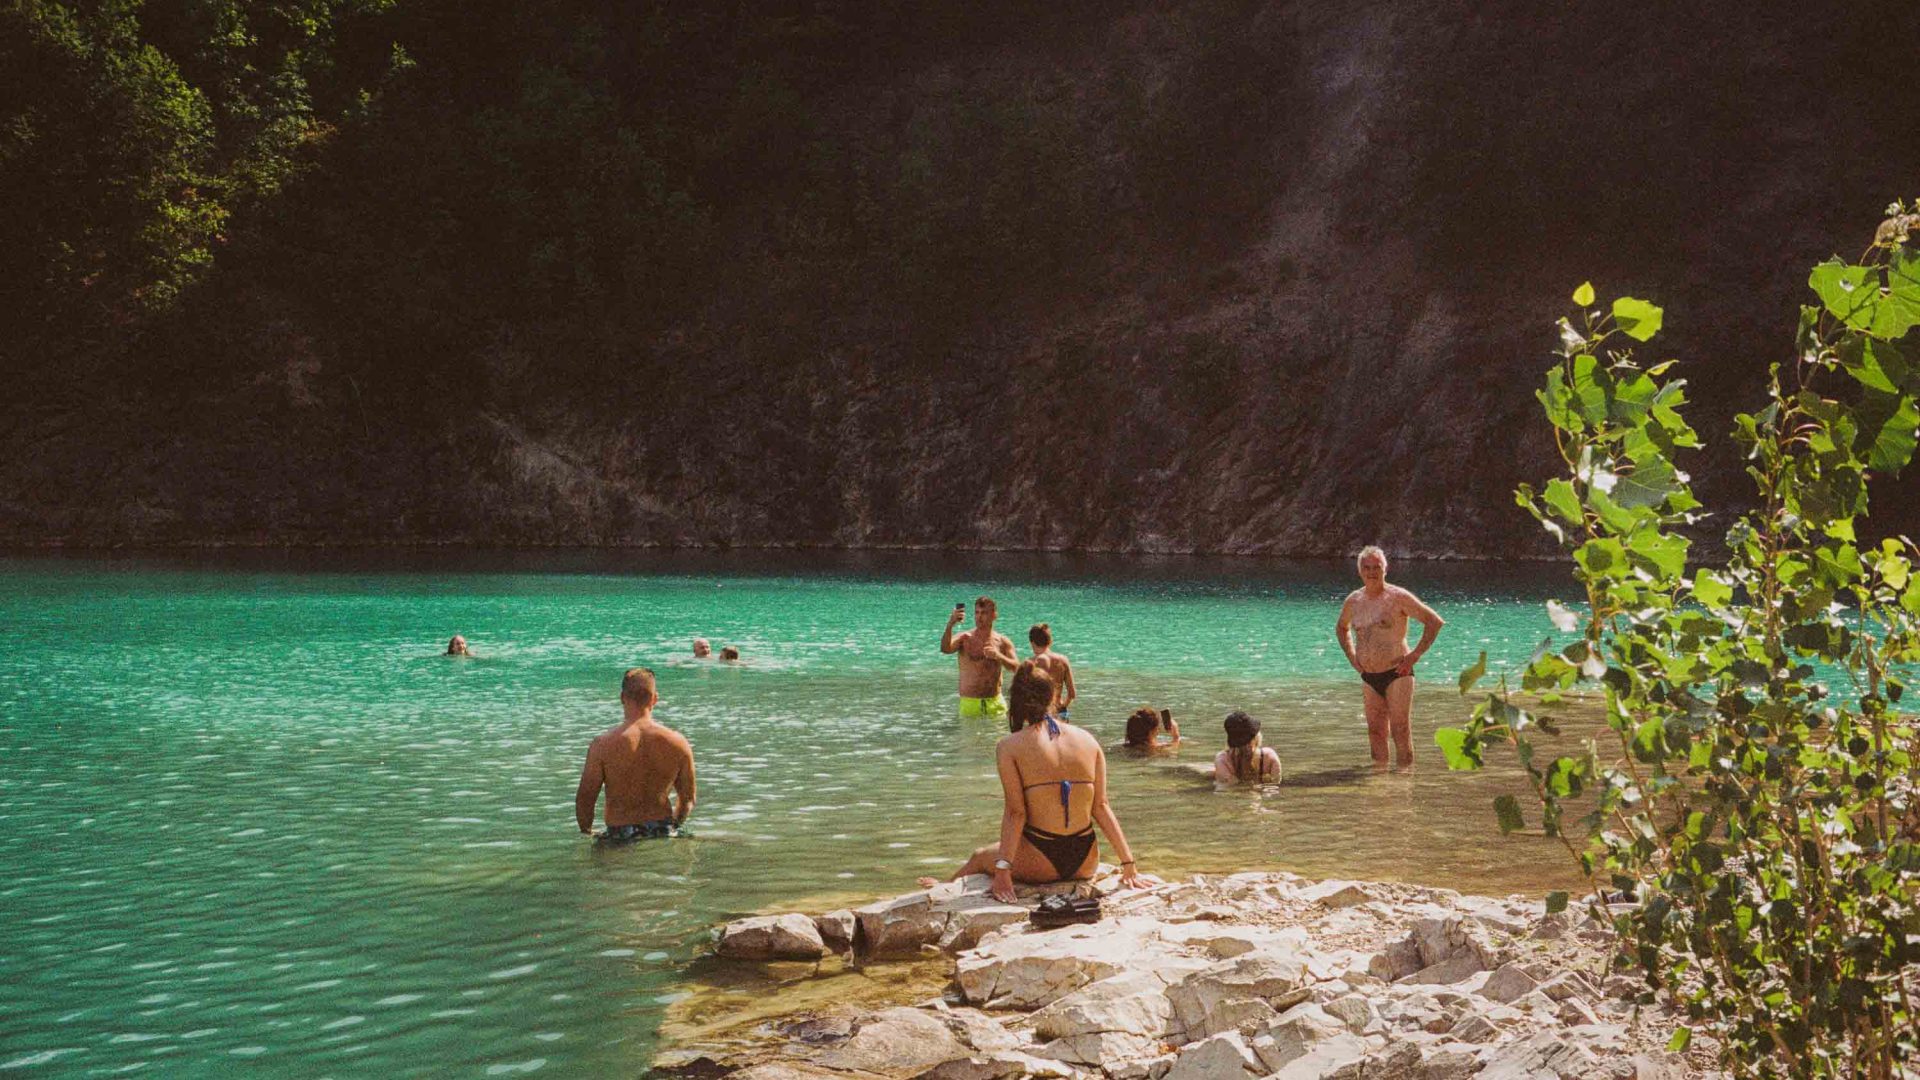 People swim at a lake in At Fruška Gora, an expansive national park. The water is a turquoise colour.